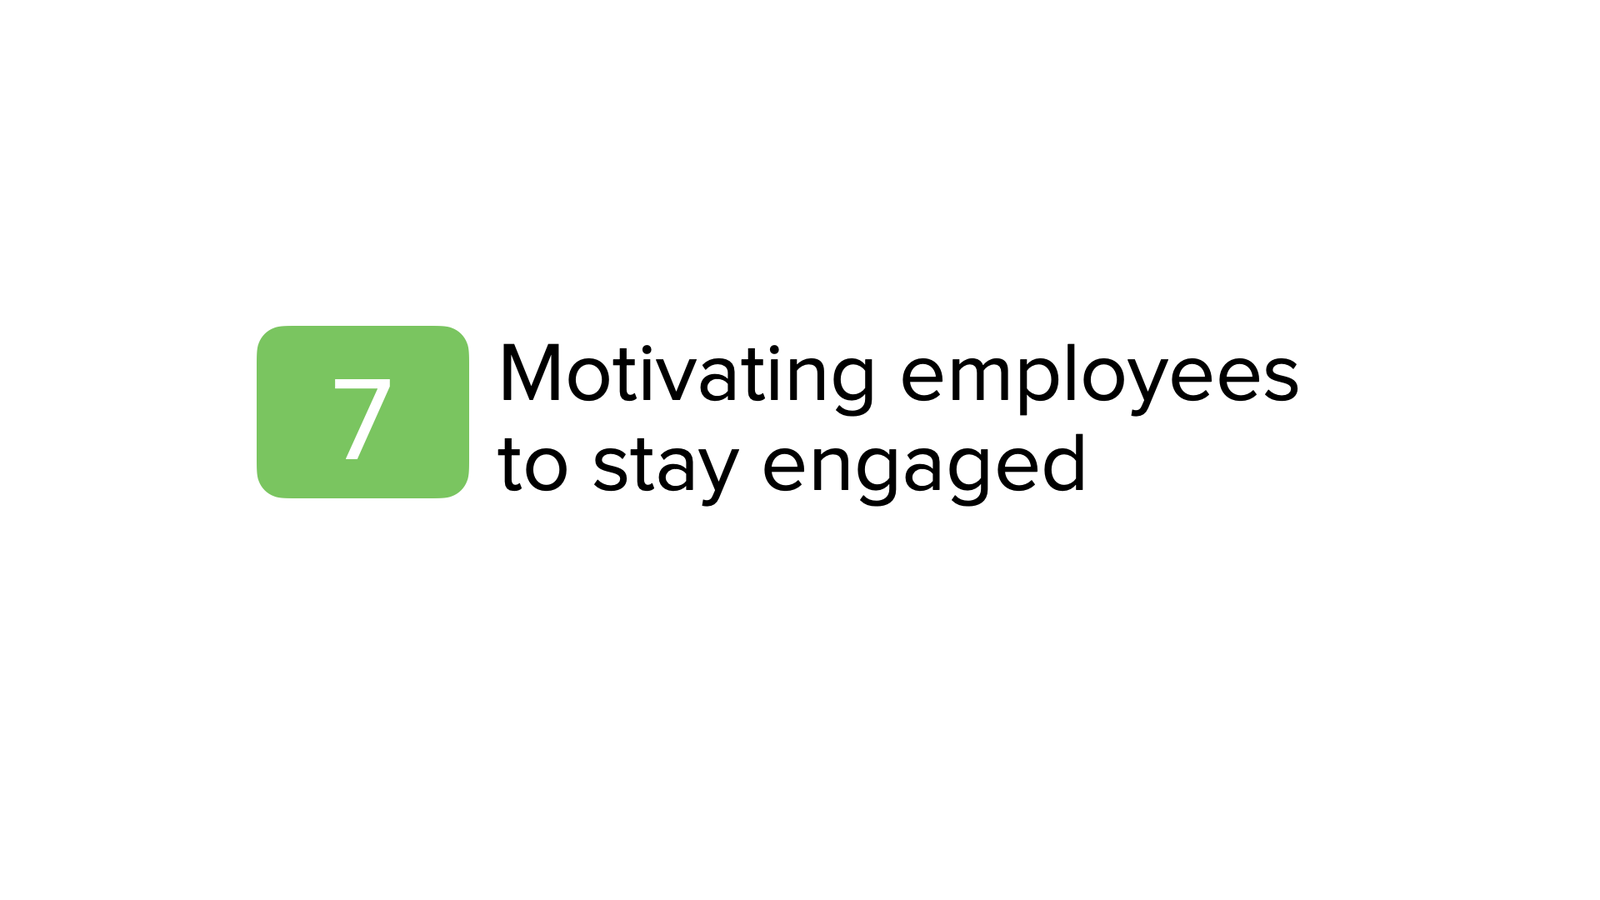 Motivate employees